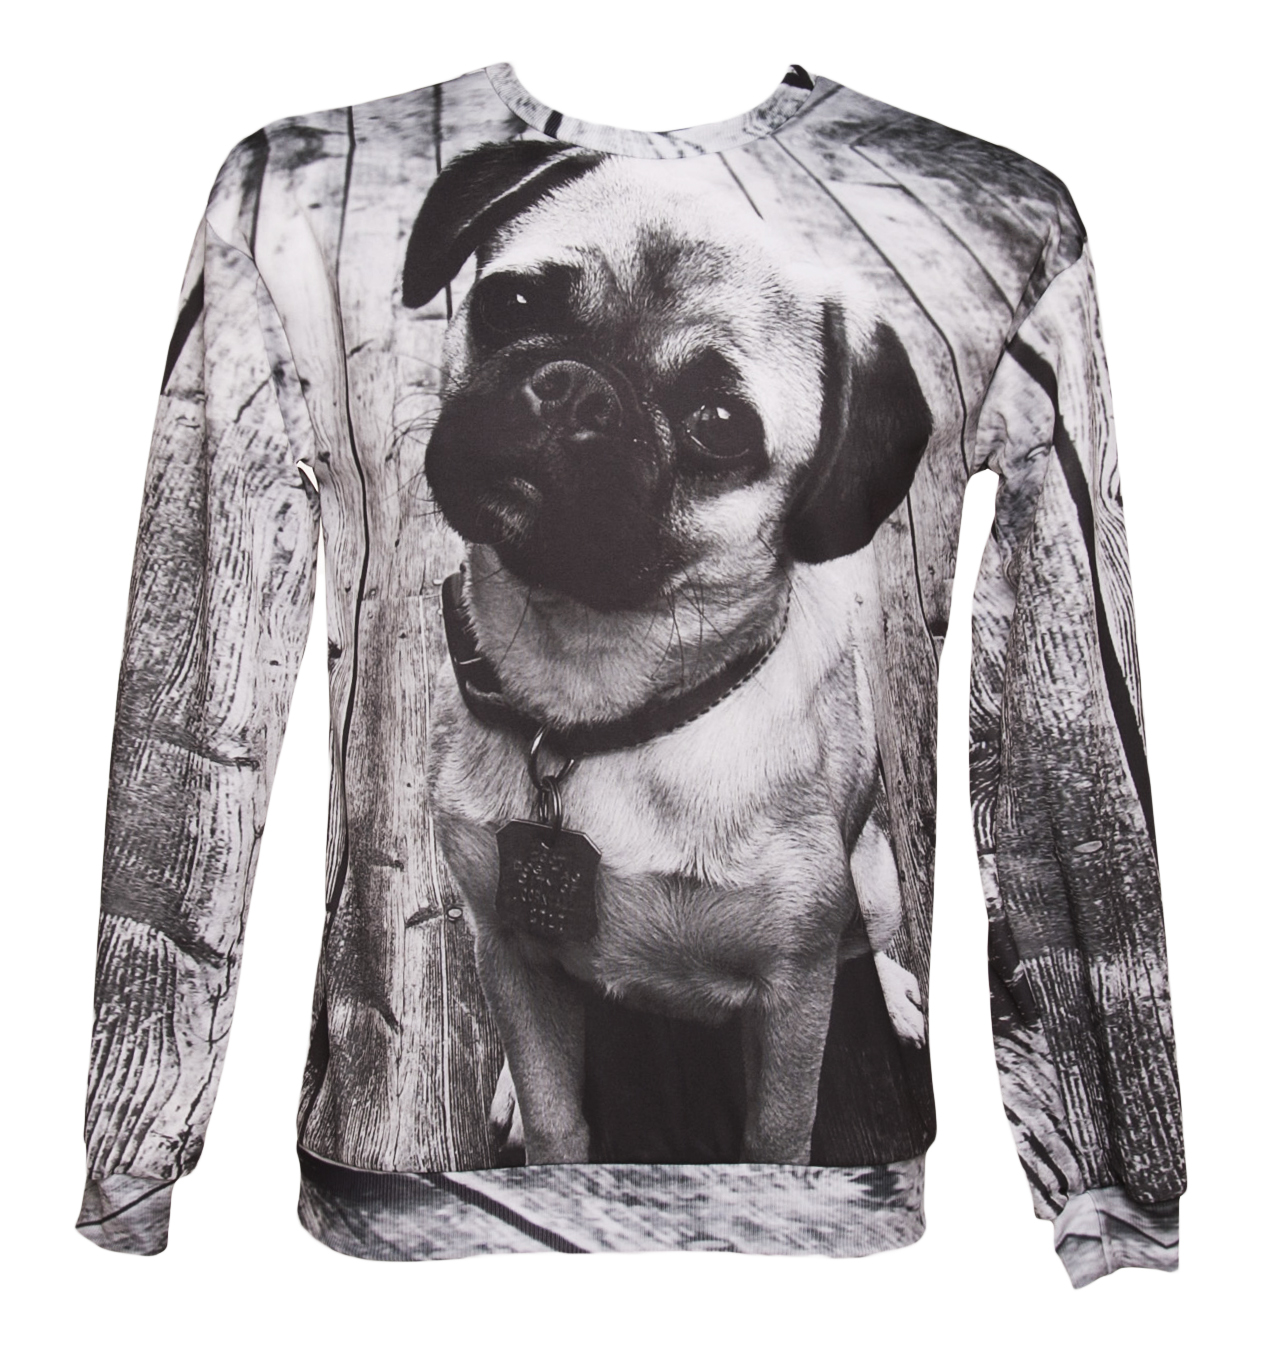 Unisex Photographic Pug Jumper from Mr Gugu